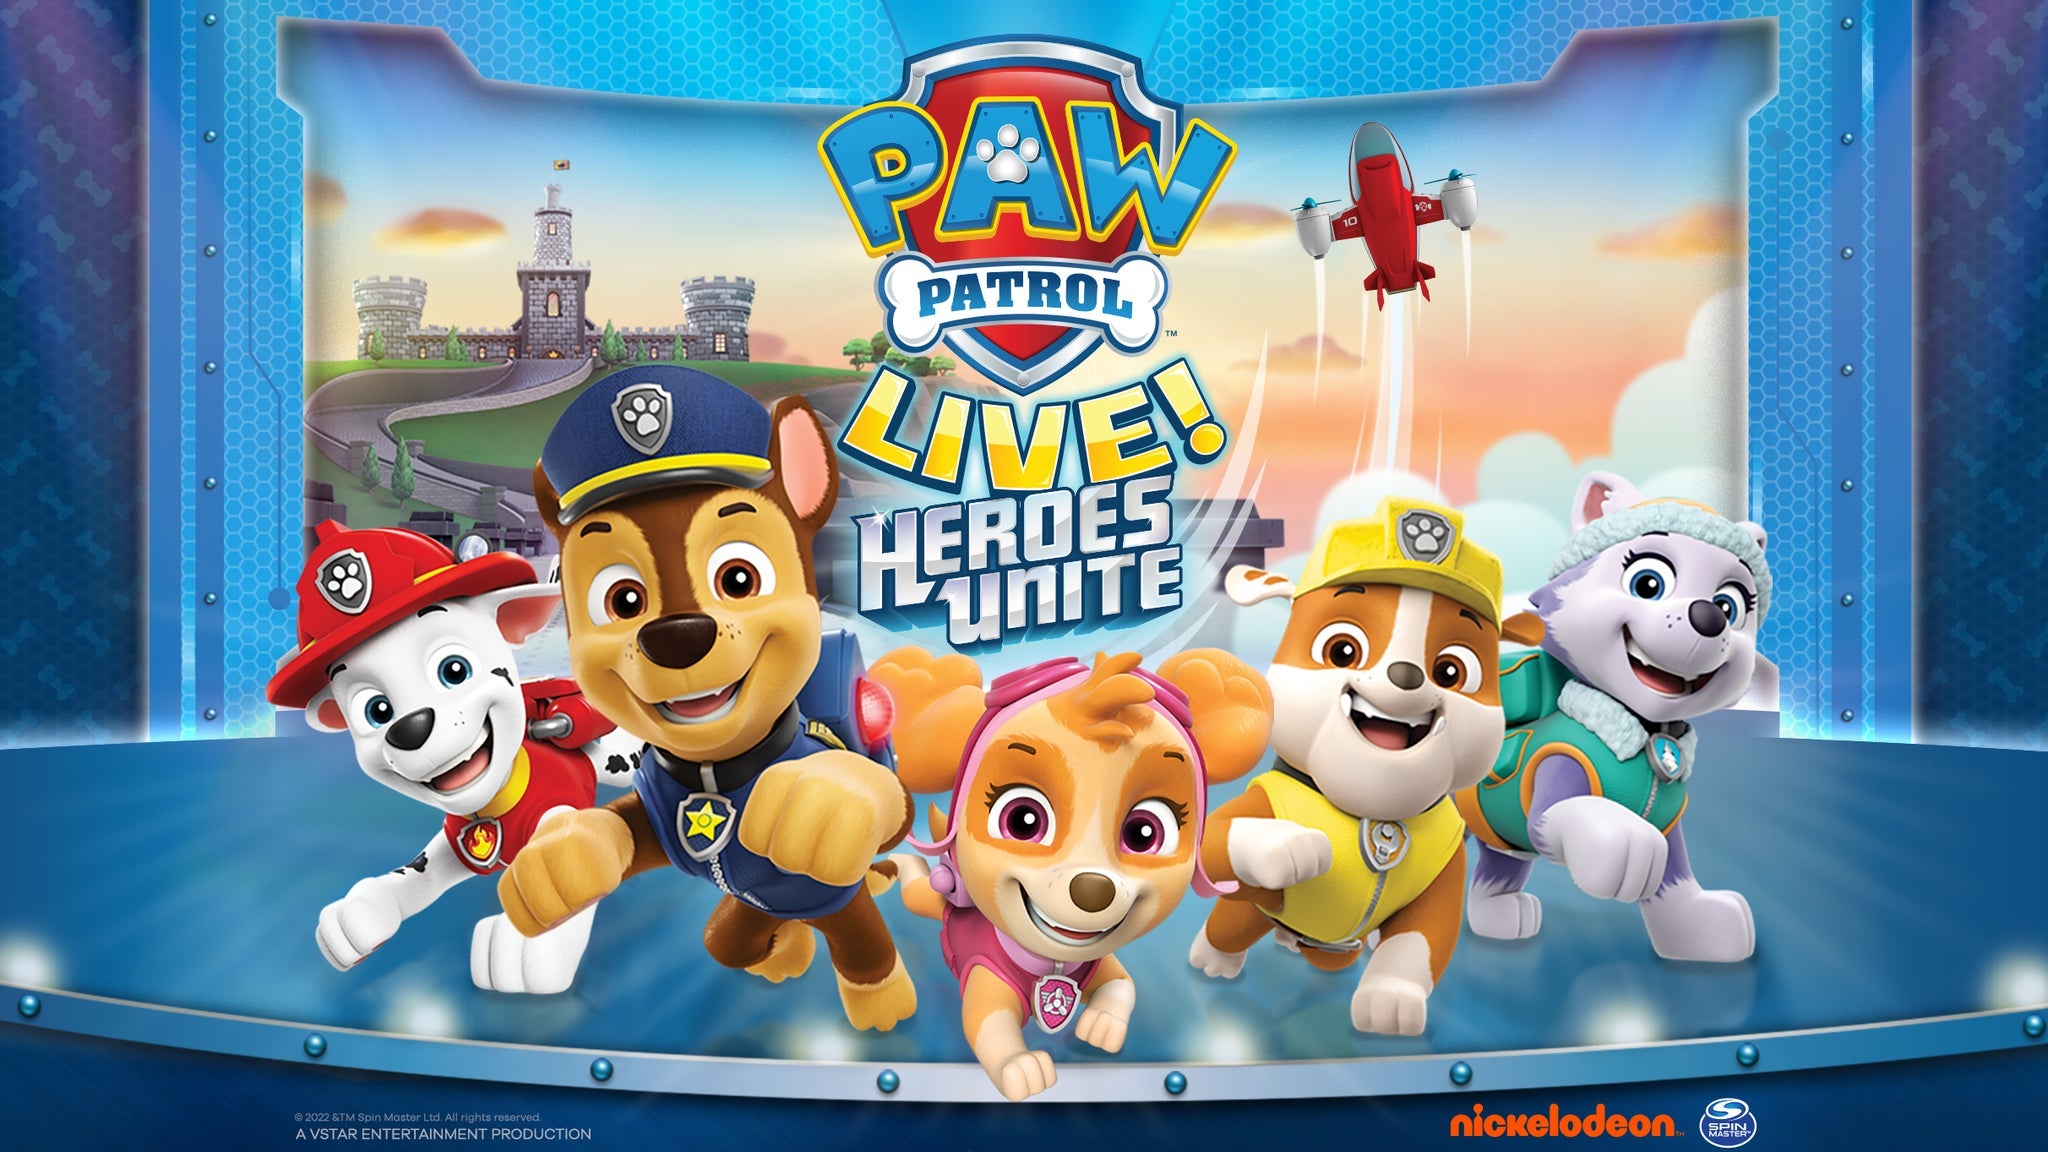 presale password to Paw Patrol Live: Heroes Unite advanced tickets in Moline